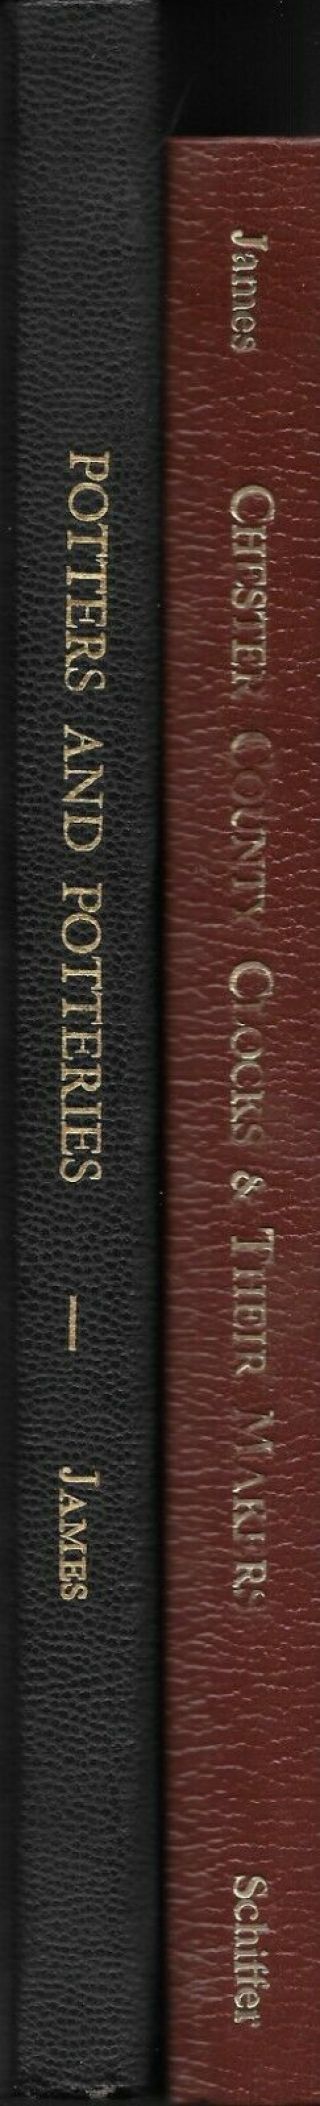 Chester County Pa Artisans,  Clockmakers,  Potters,  2 Volumes